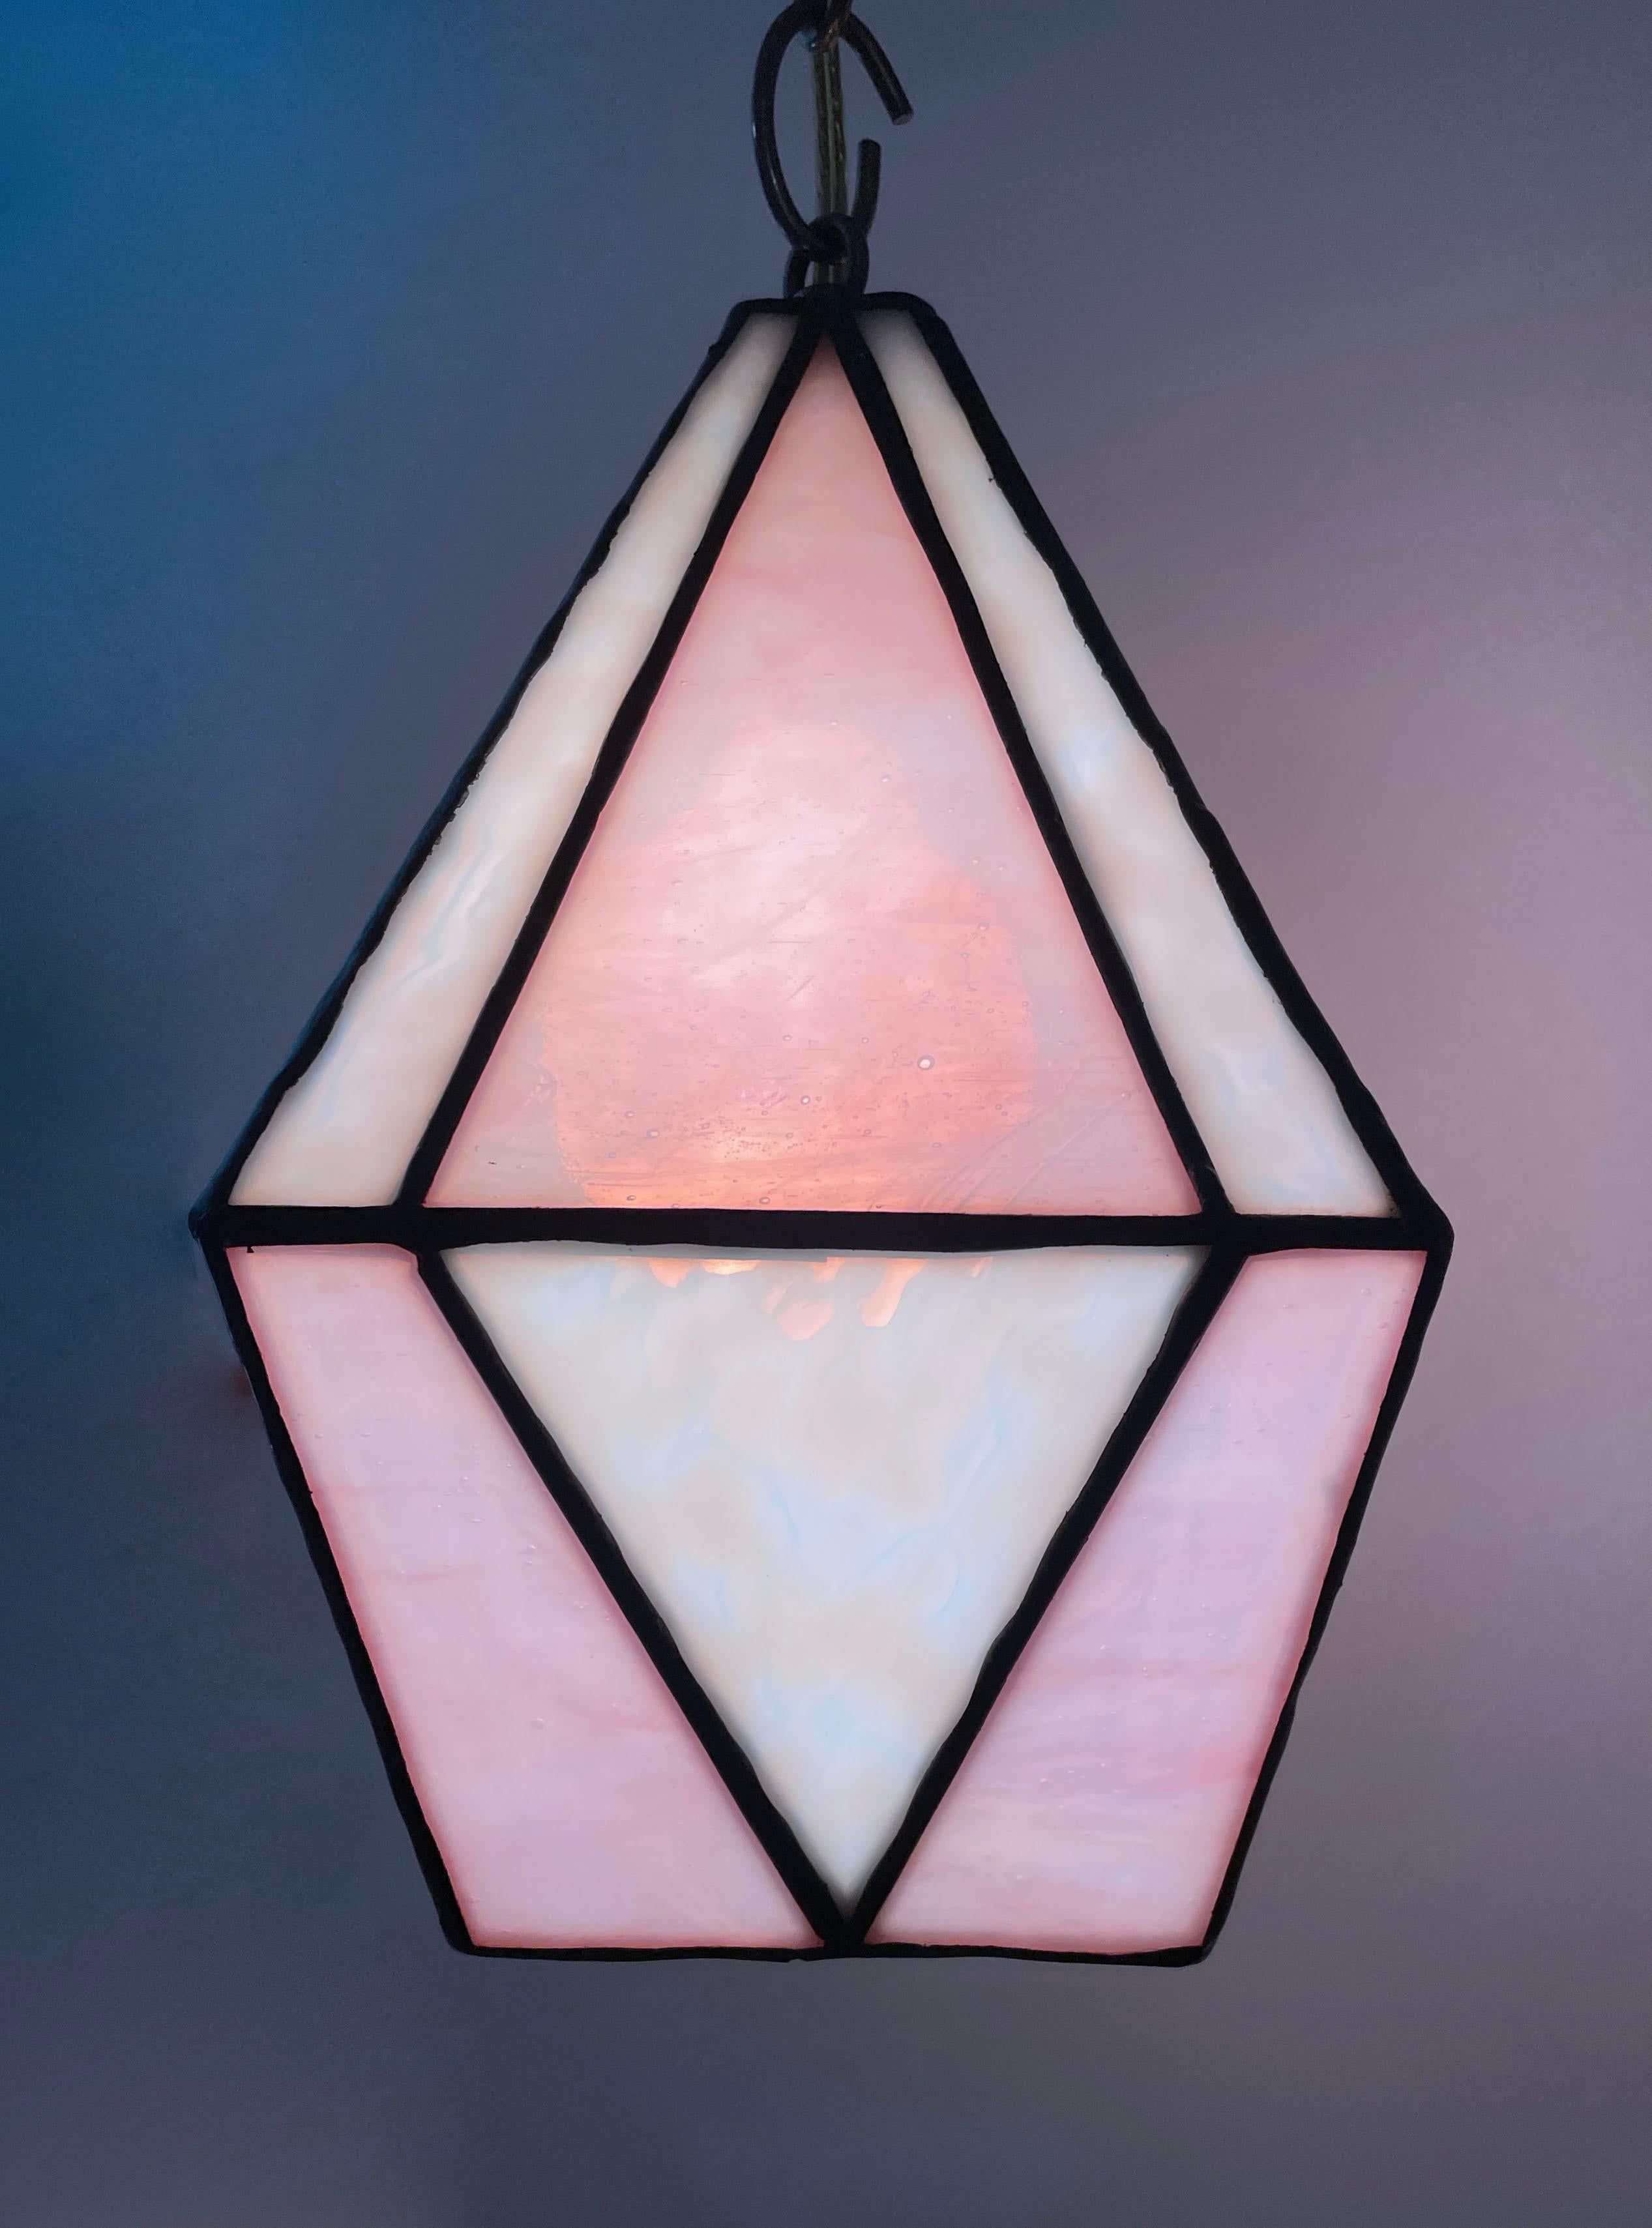 Handcrafted stained glass ceiling lamp with brass hardware, decorators chain and 8ft wall plug with toggle switch. Pink streaky and white ring mottled glass. Ready to hang.  Multiples available but each one is slightly unique by the hand made